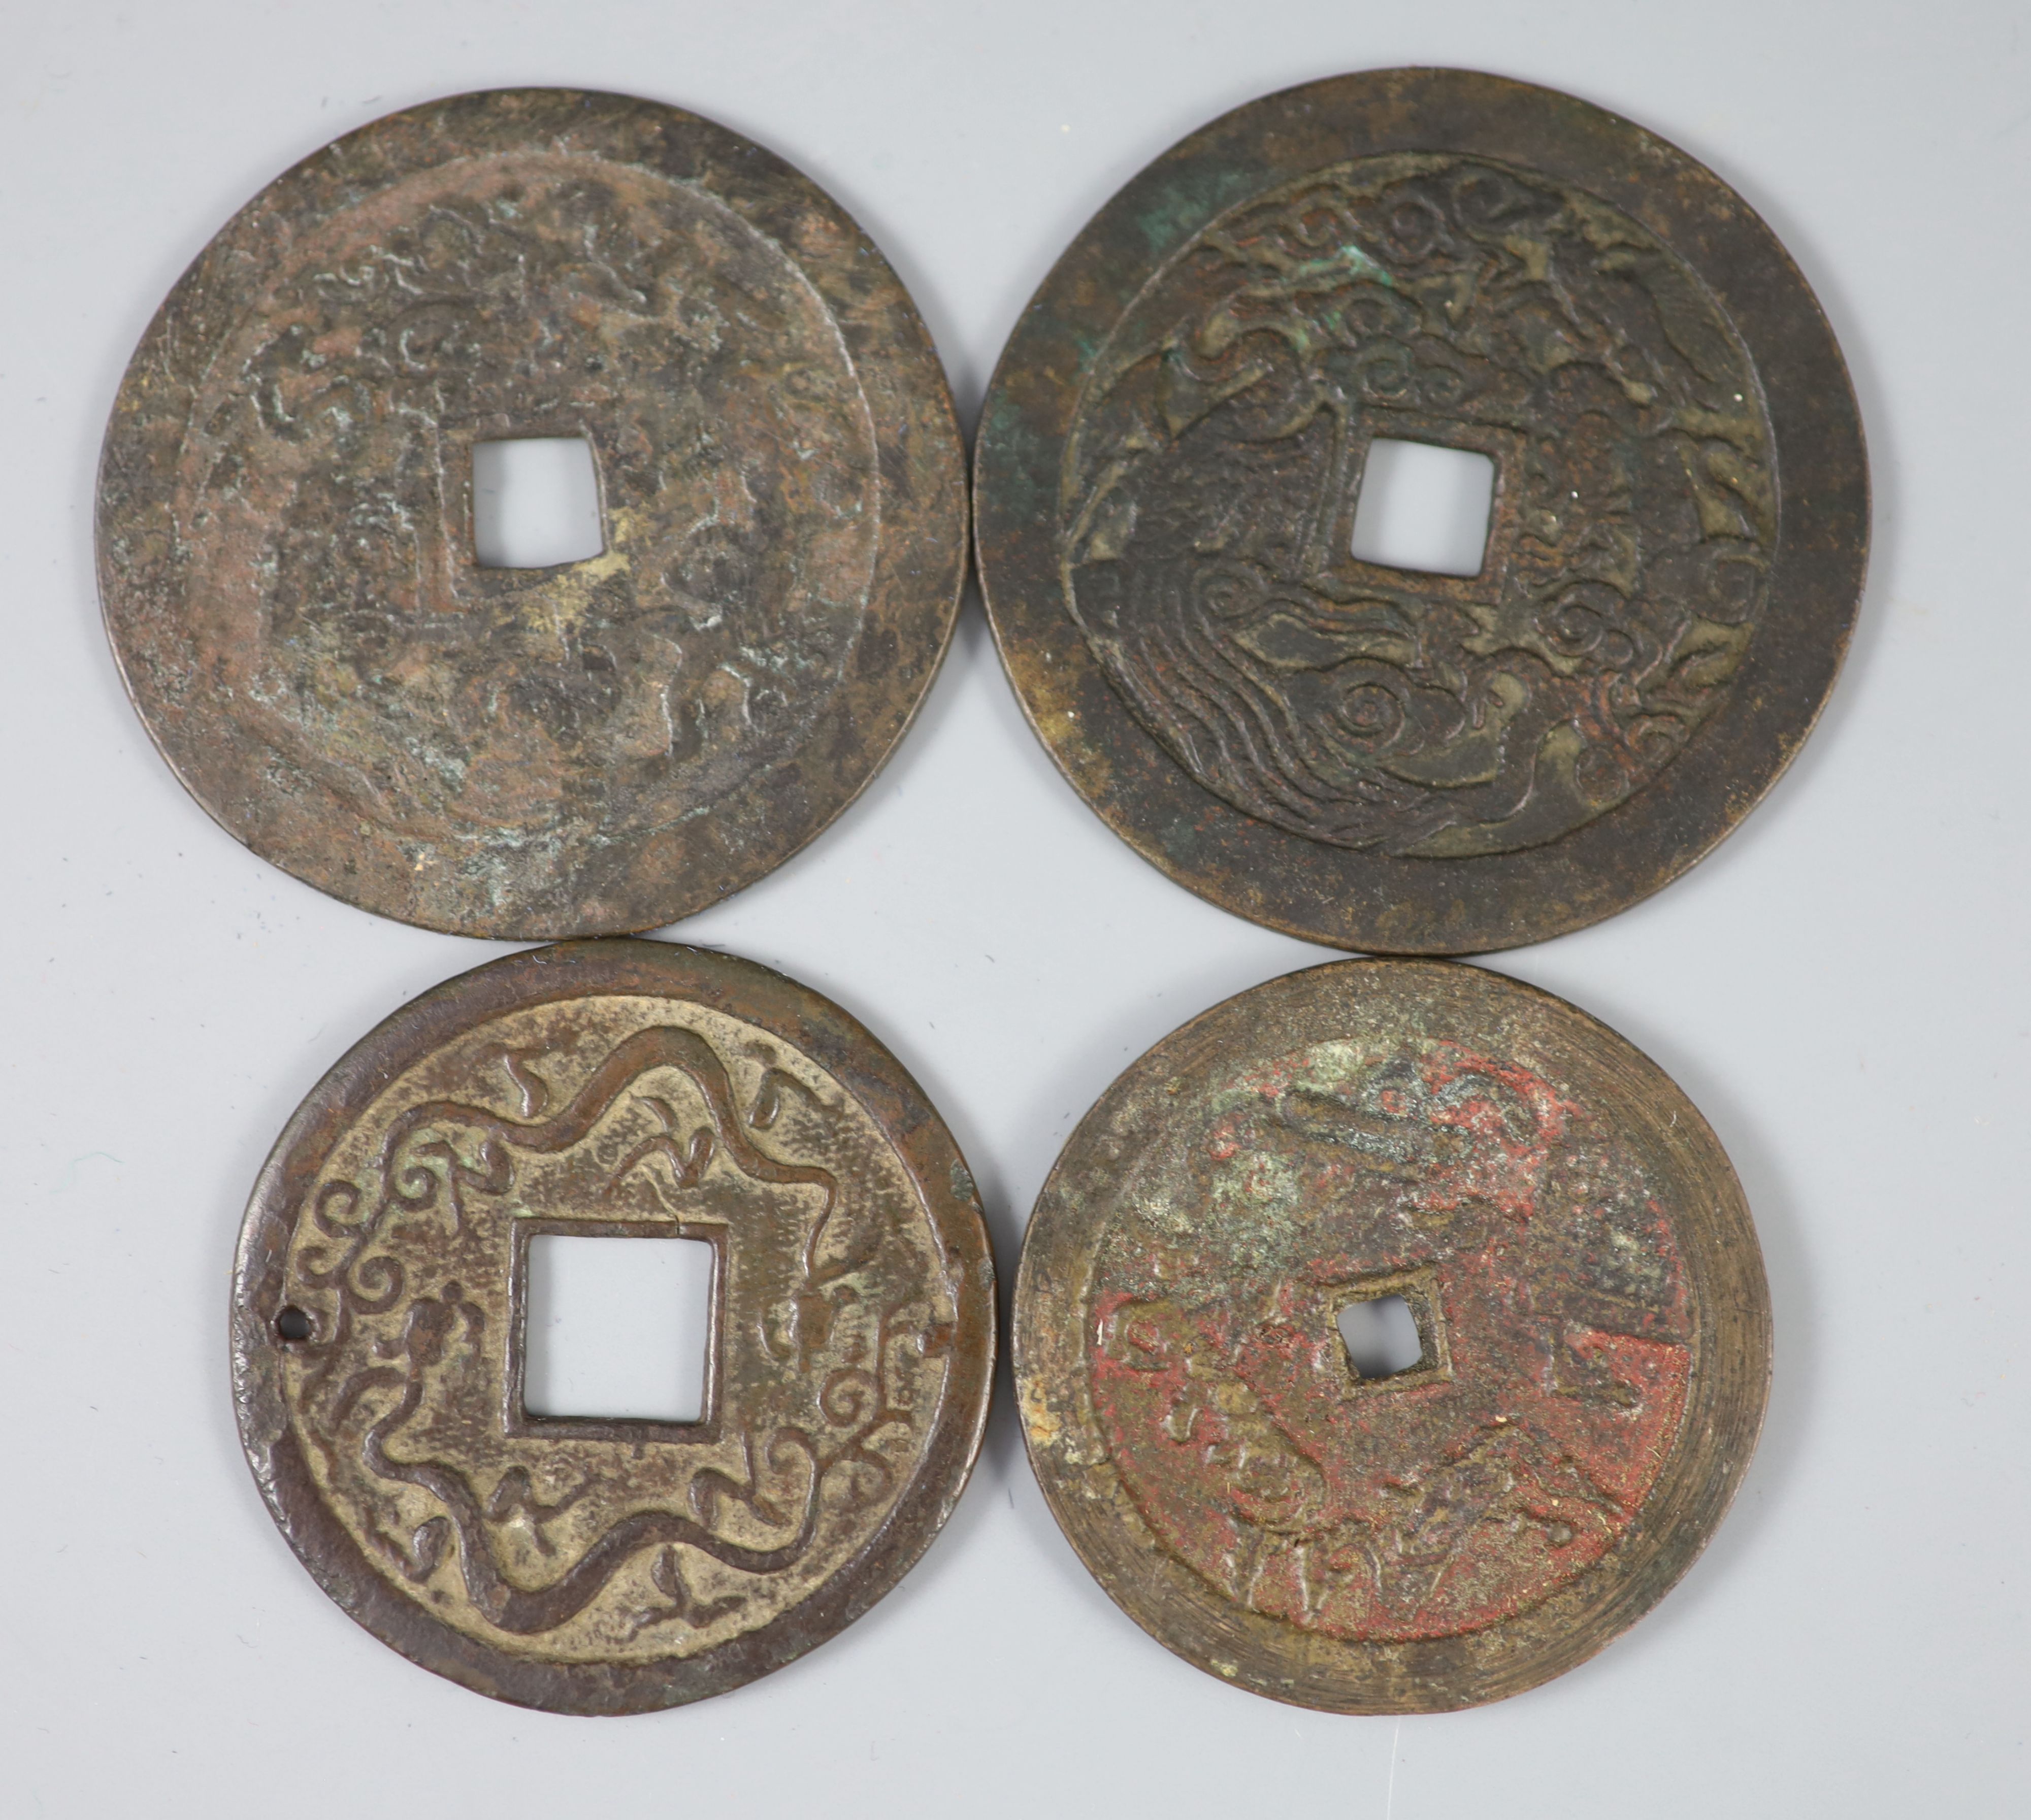 China, 4 bronze or copper charms or amulets, Qing dynasty,